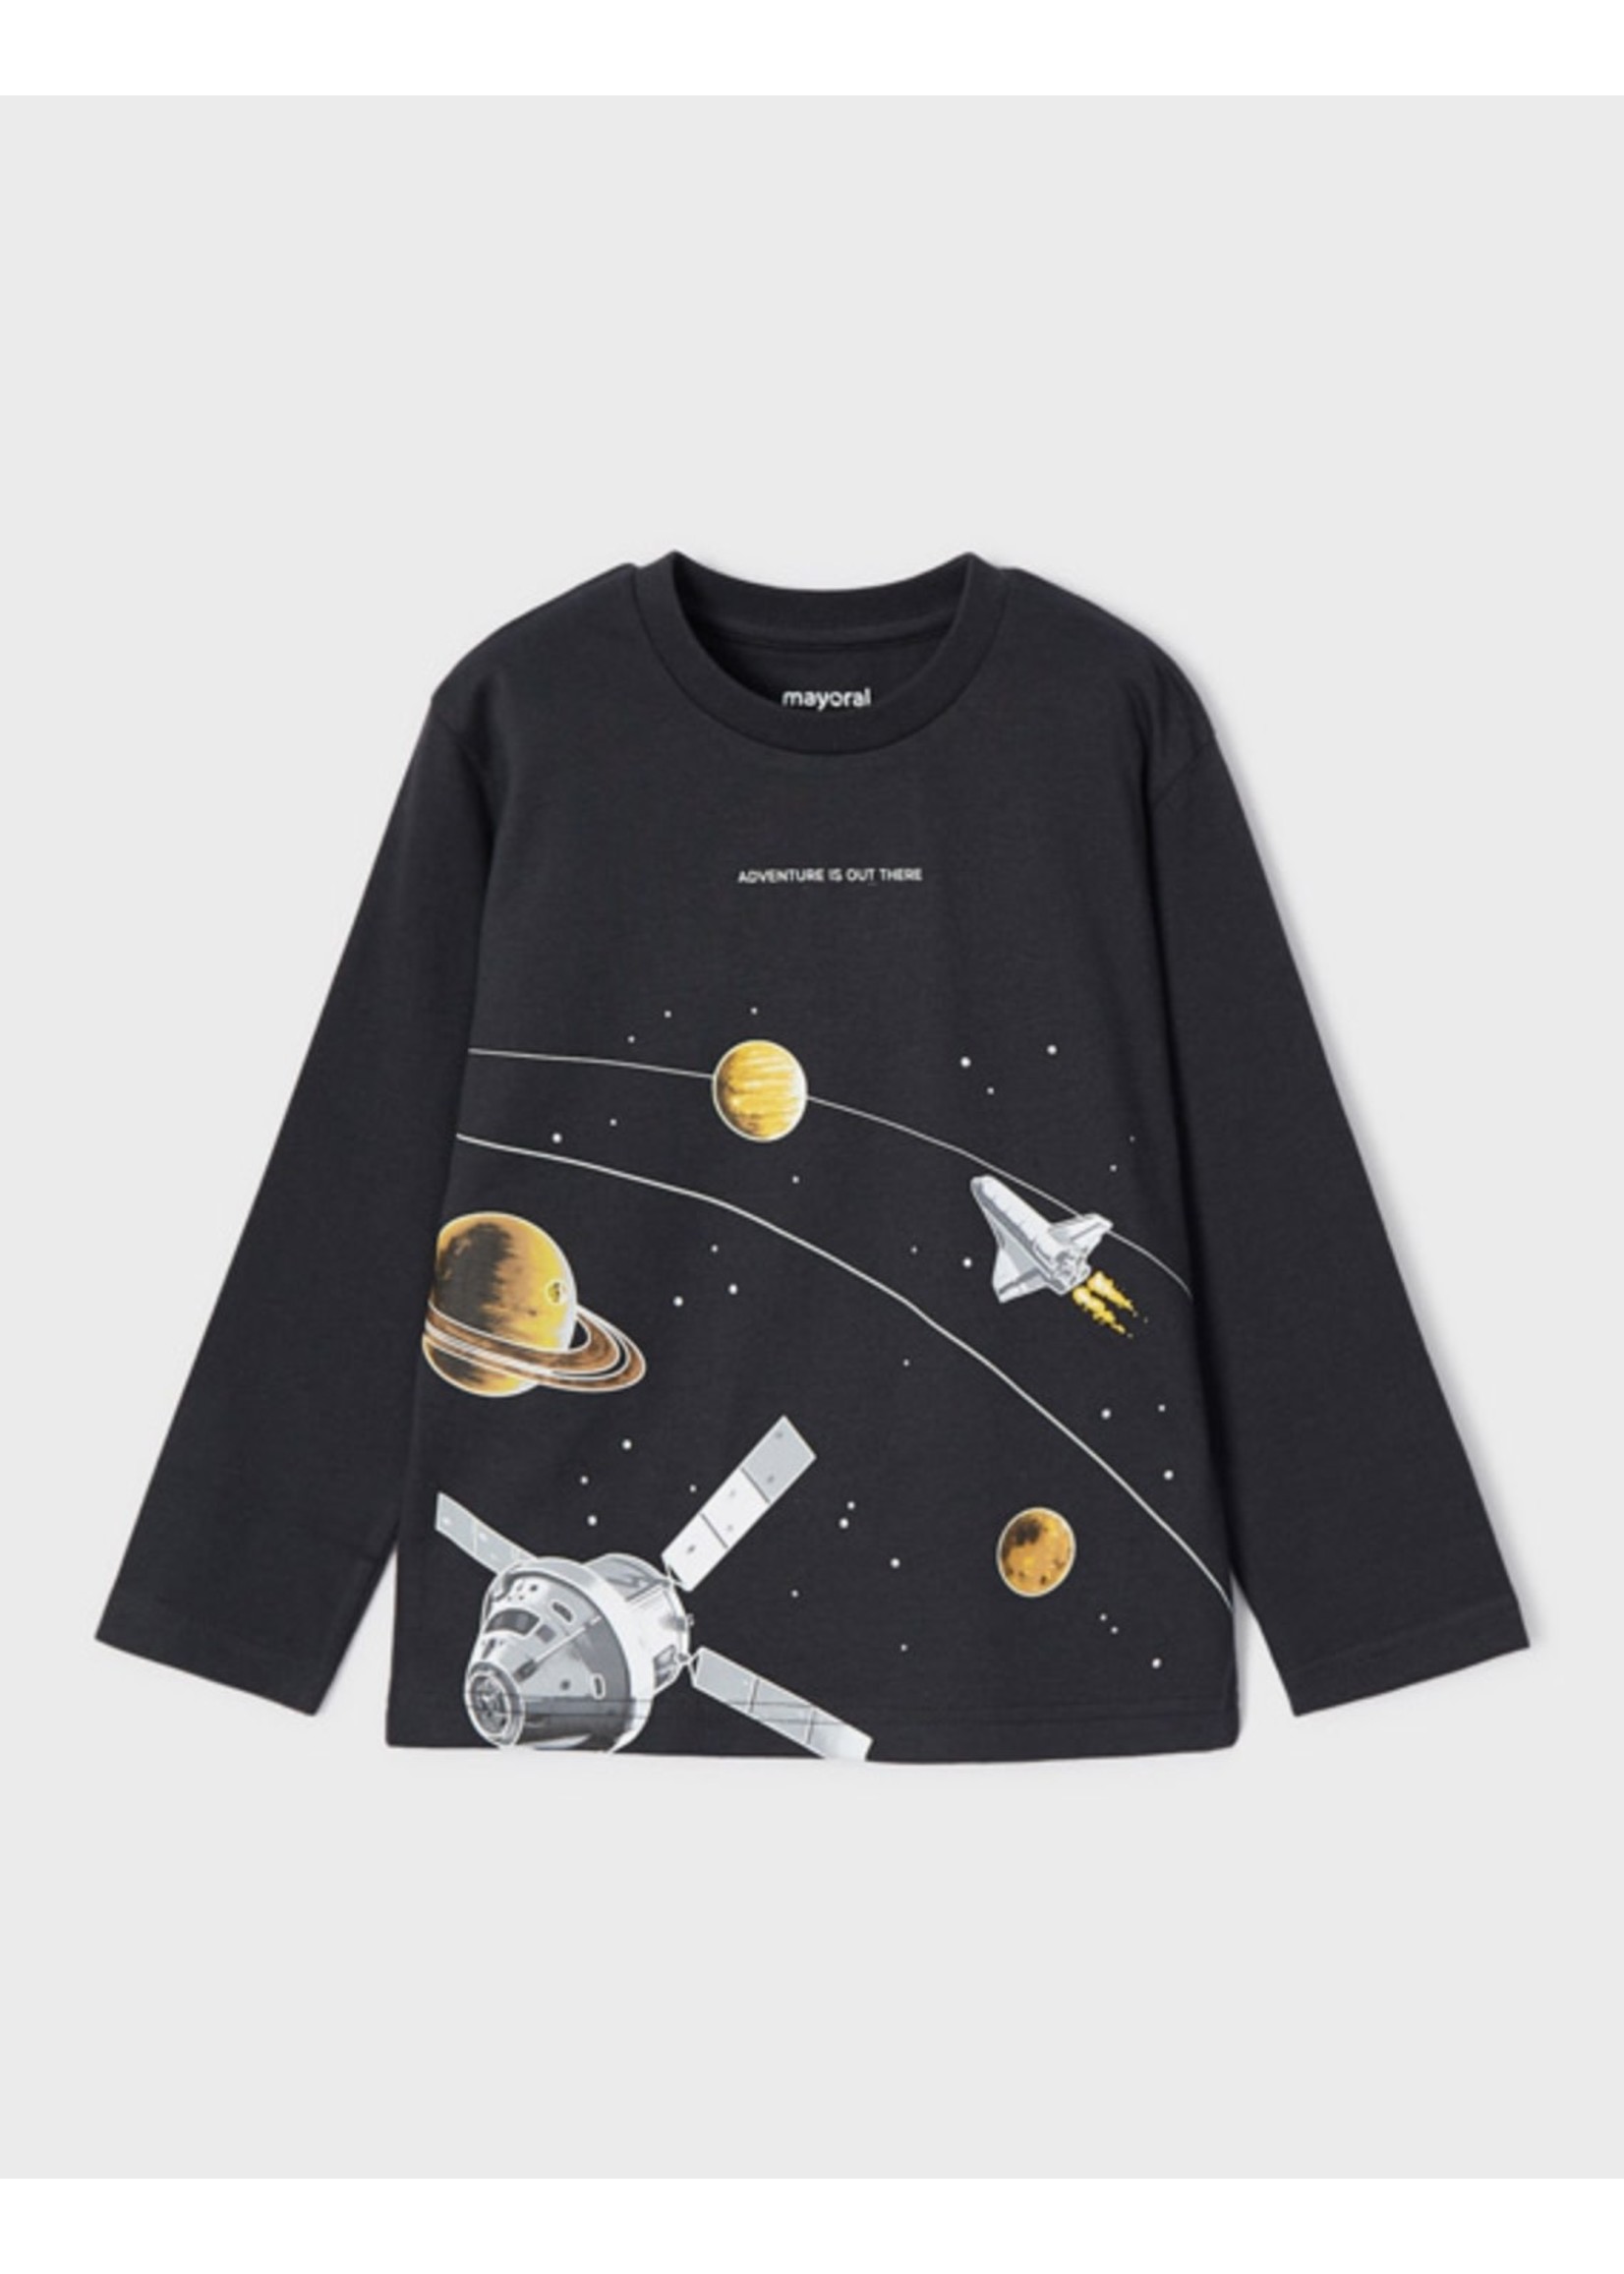 Mayoral Mayoral, ECOFRIENDS Space Print Glow in the Dark Long Sleeve T-Shirt in Carbon